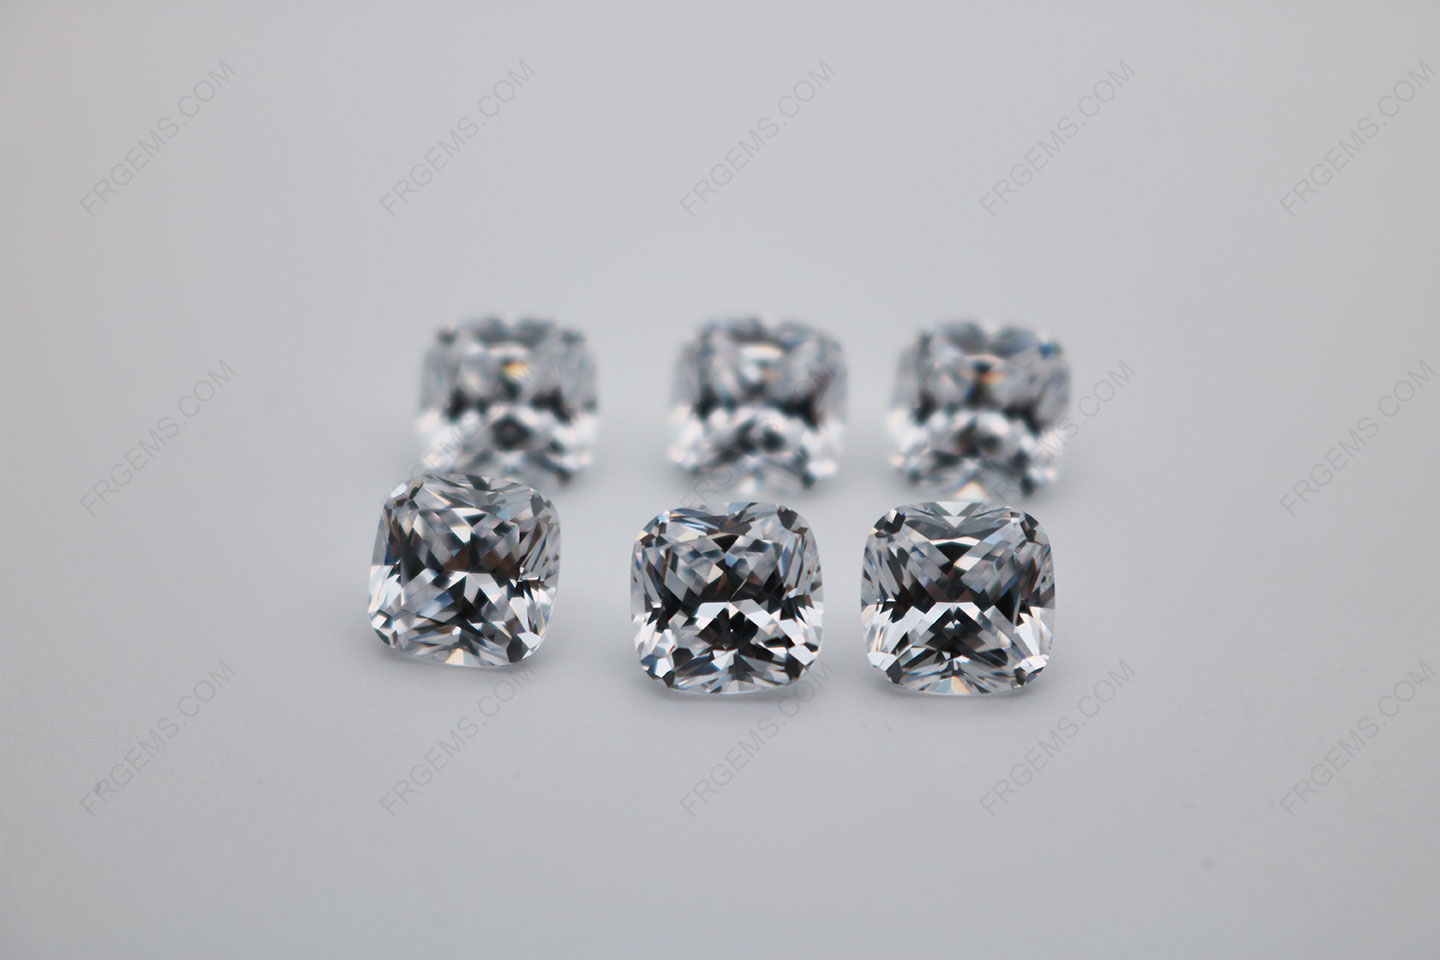 Cubic Zirconia White Color 5A Best Quality Cushion Shape Faceted Cut 10x10mm stones CZ01 IMG_0671